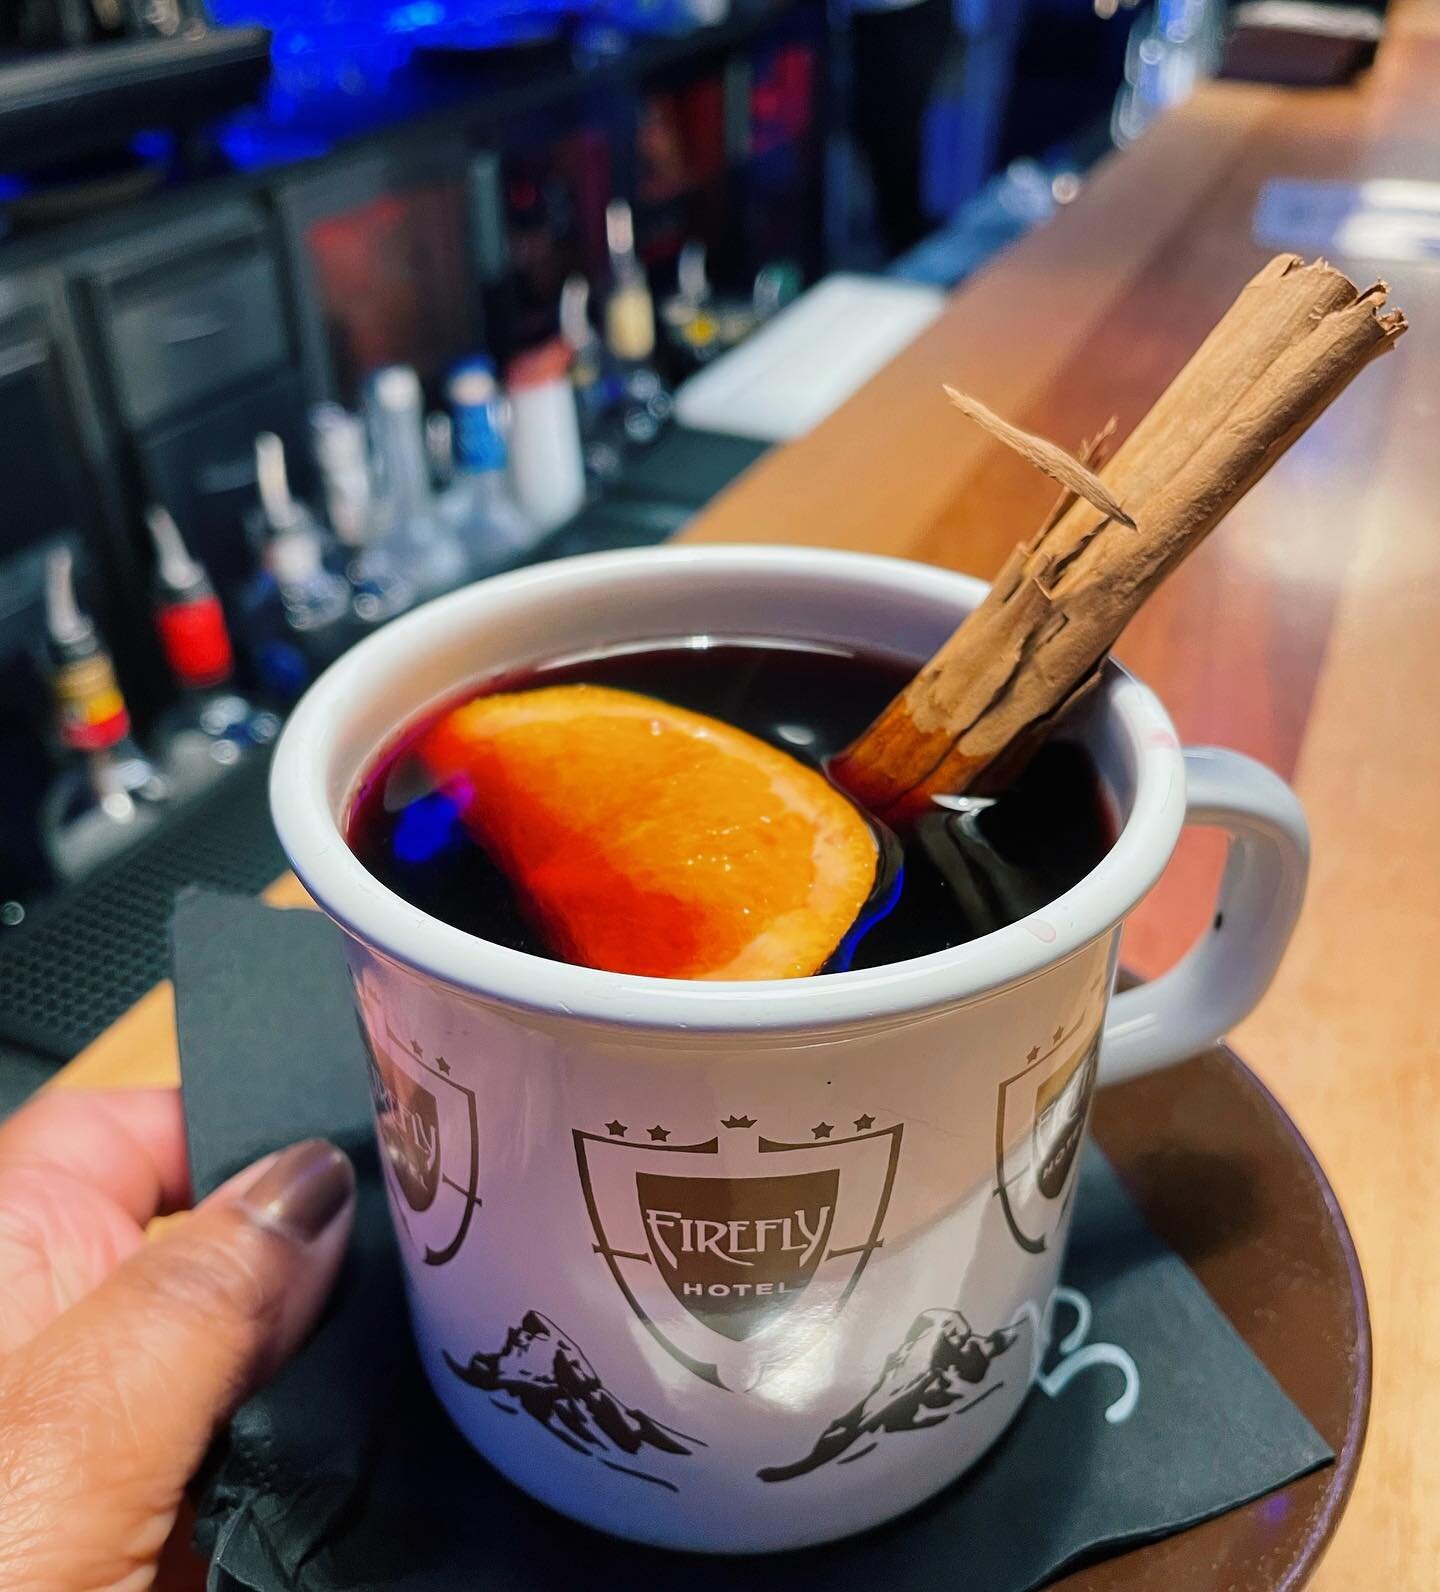 ❄️ Missing my Gluehwein and the snow. So much to do in 2022 and slowly working on new goals and resolutions.  Any  gluehwein fans out there?  For those who don&rsquo;t know this warming, sweet concoction, it is is a German/Austrian winter-holiday dri